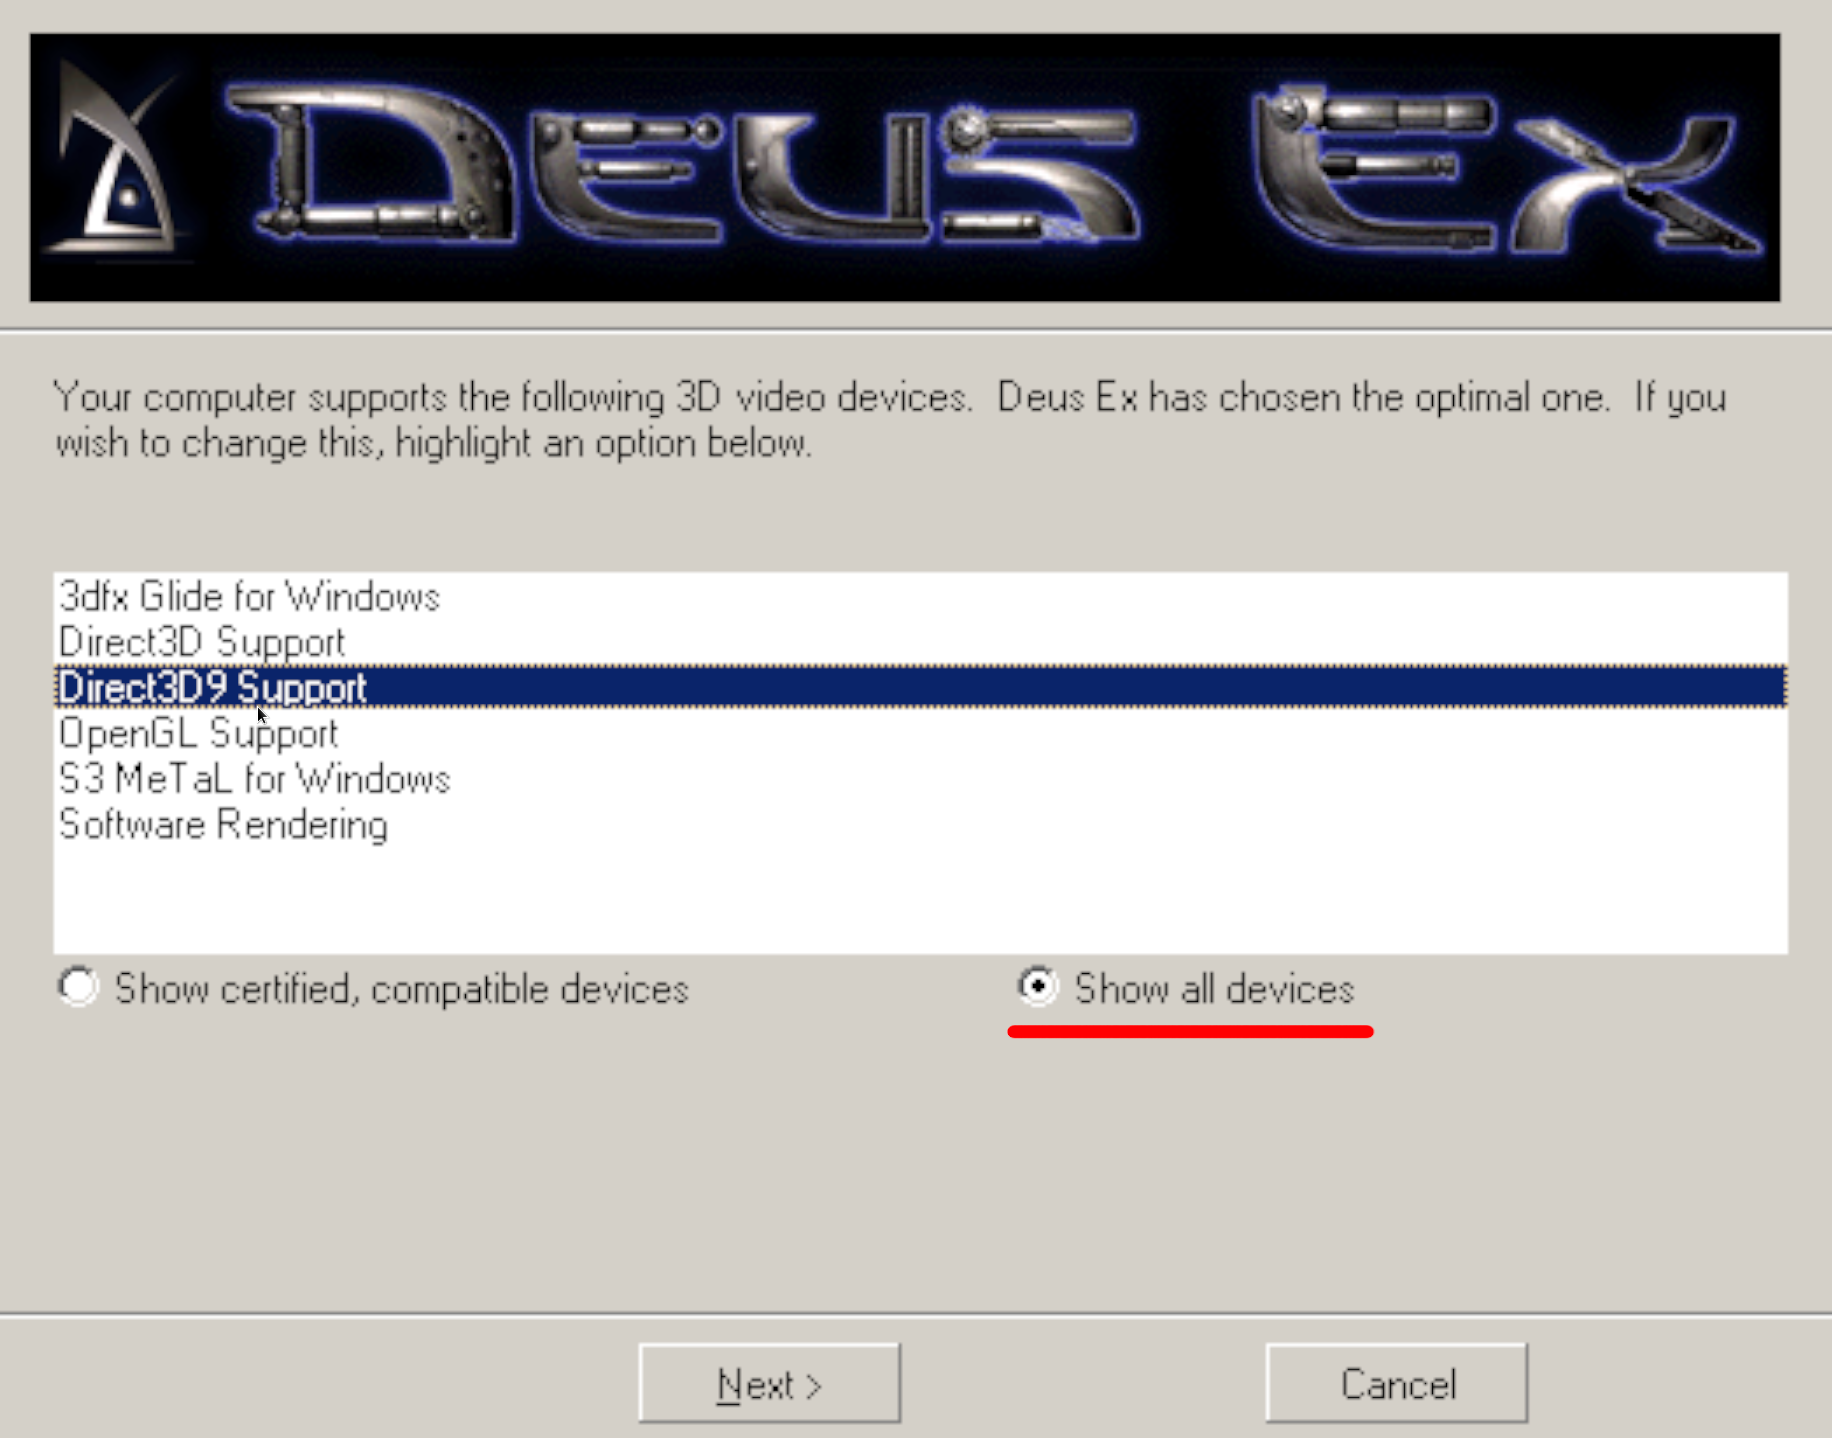 A window with the title Deus Ex in a stylized font. Below it lists several options such as Direct3D Support, Direct3D9 Support, and OpenGL Support. Direct3D9 is selected. Below are two radio buttons, with the one titled Show all devices selected.